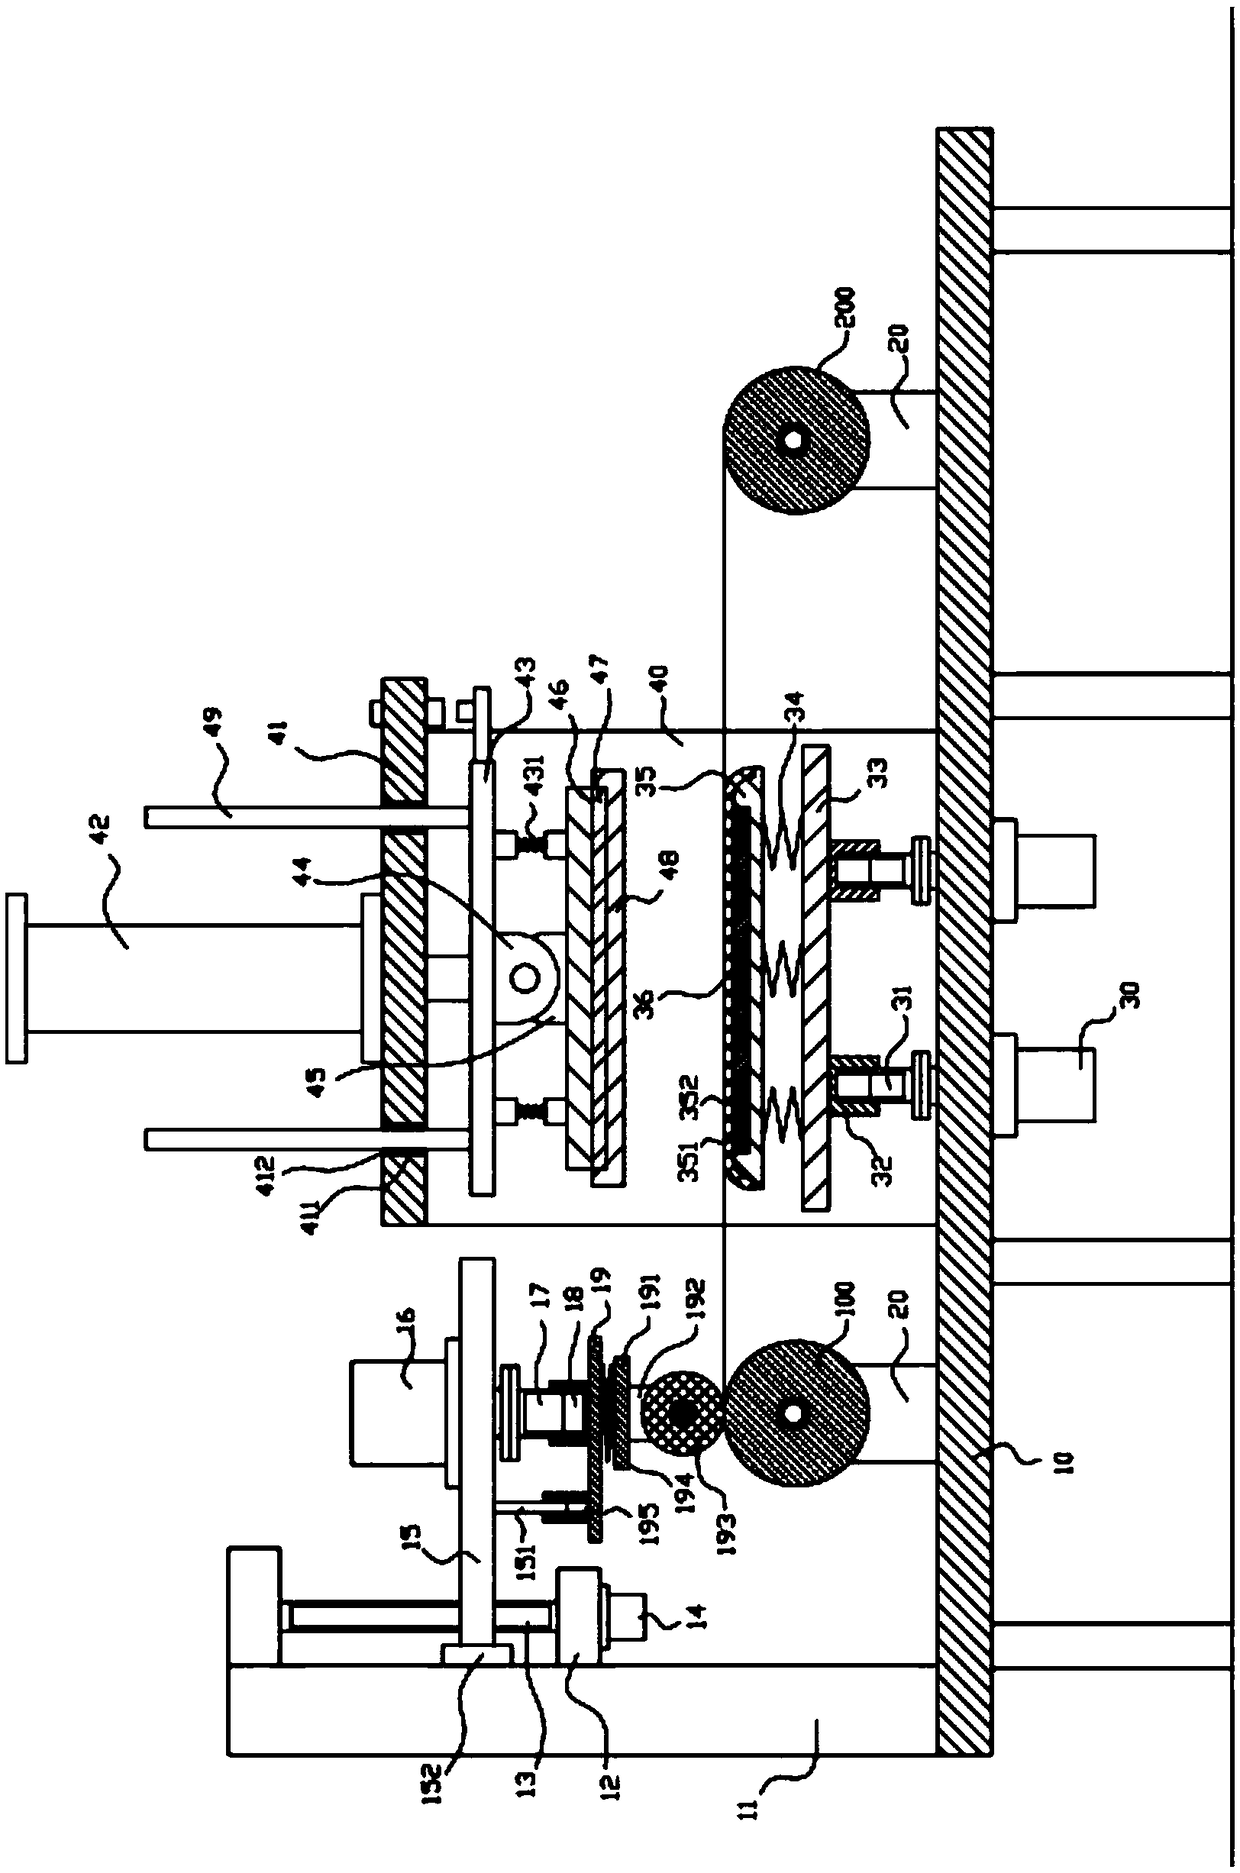 Connecting cloth embossing processing device